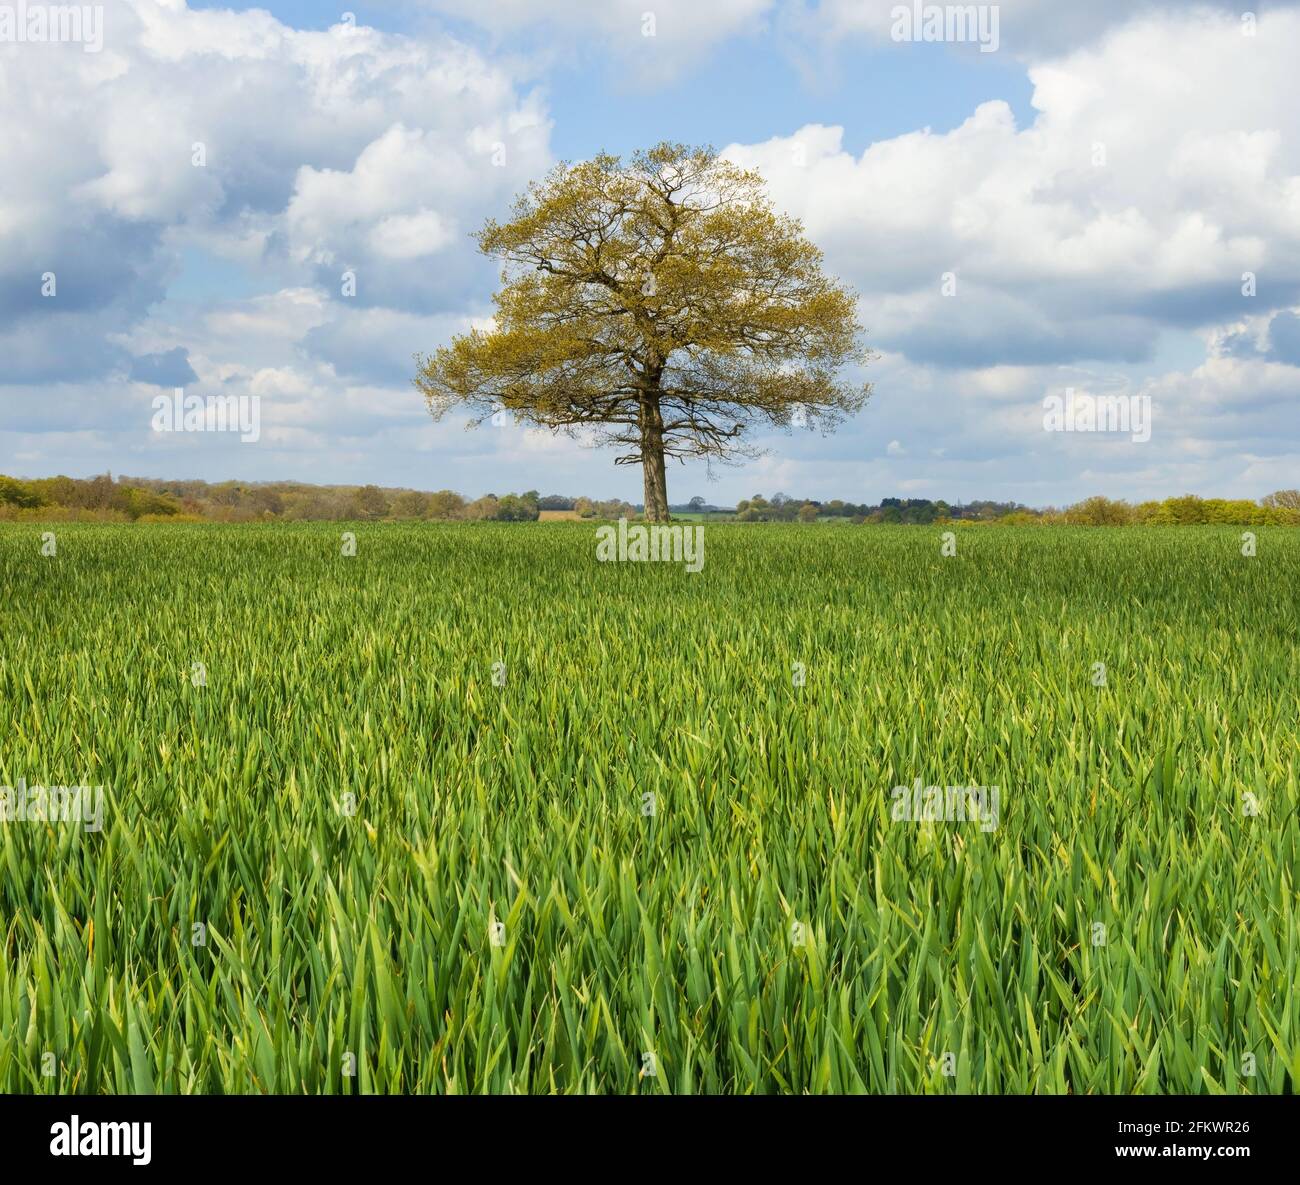 Young green shoots of wheat in the foreground, with a solitary oak tree in the background. Hertfordshire. UK Stock Photo